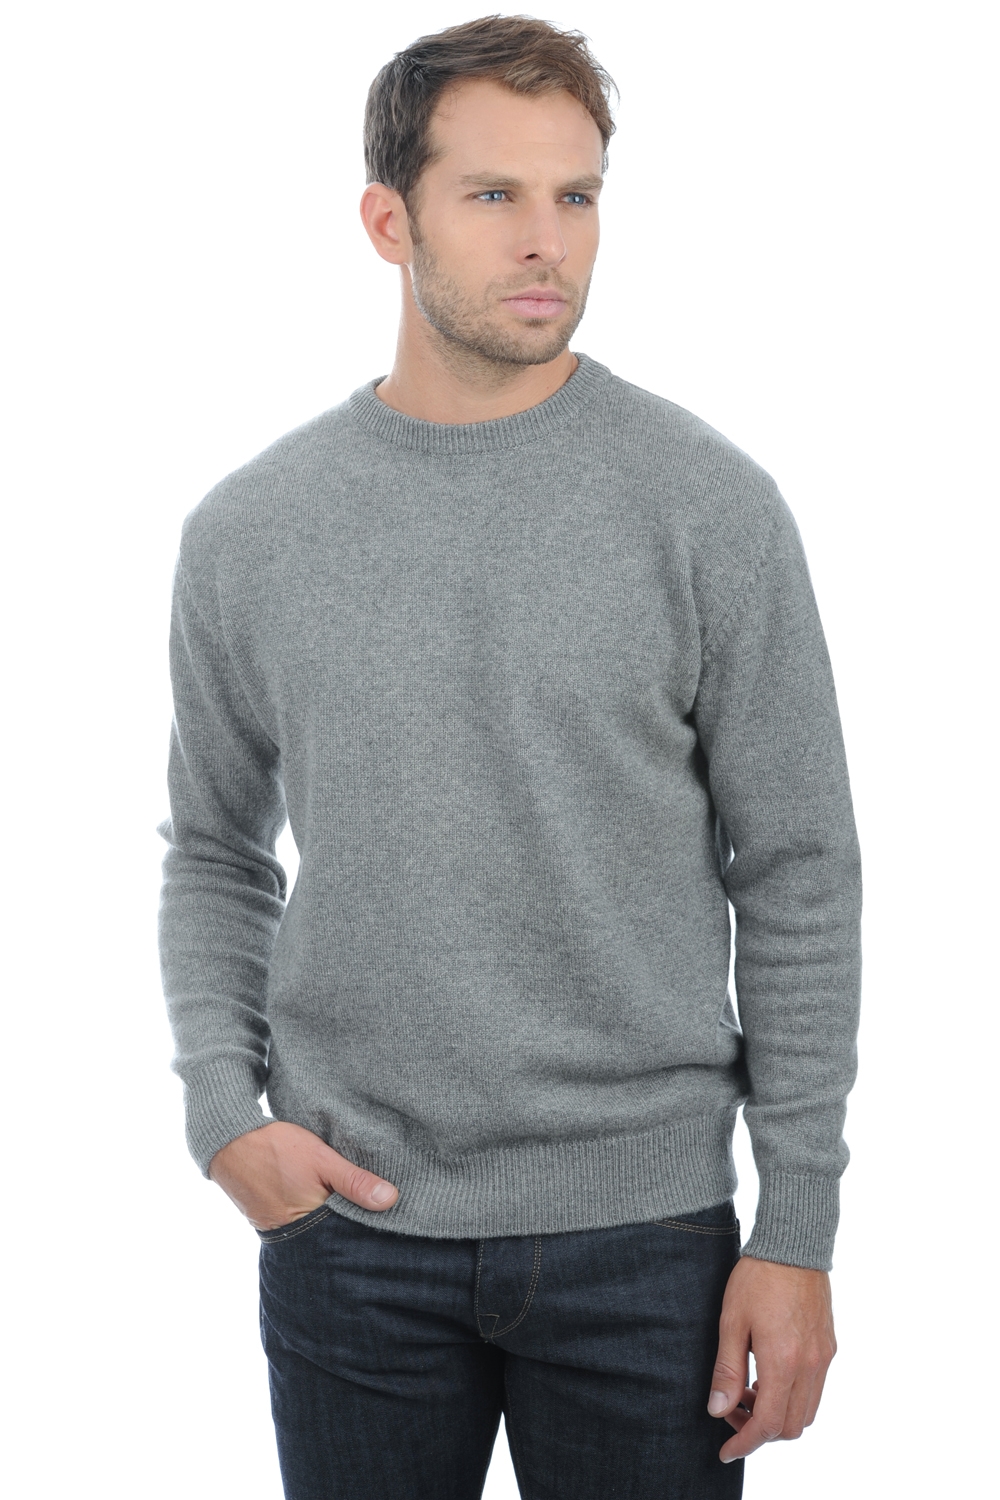 Cachemire pull homme col rond nestor 4f gris chine 2xl